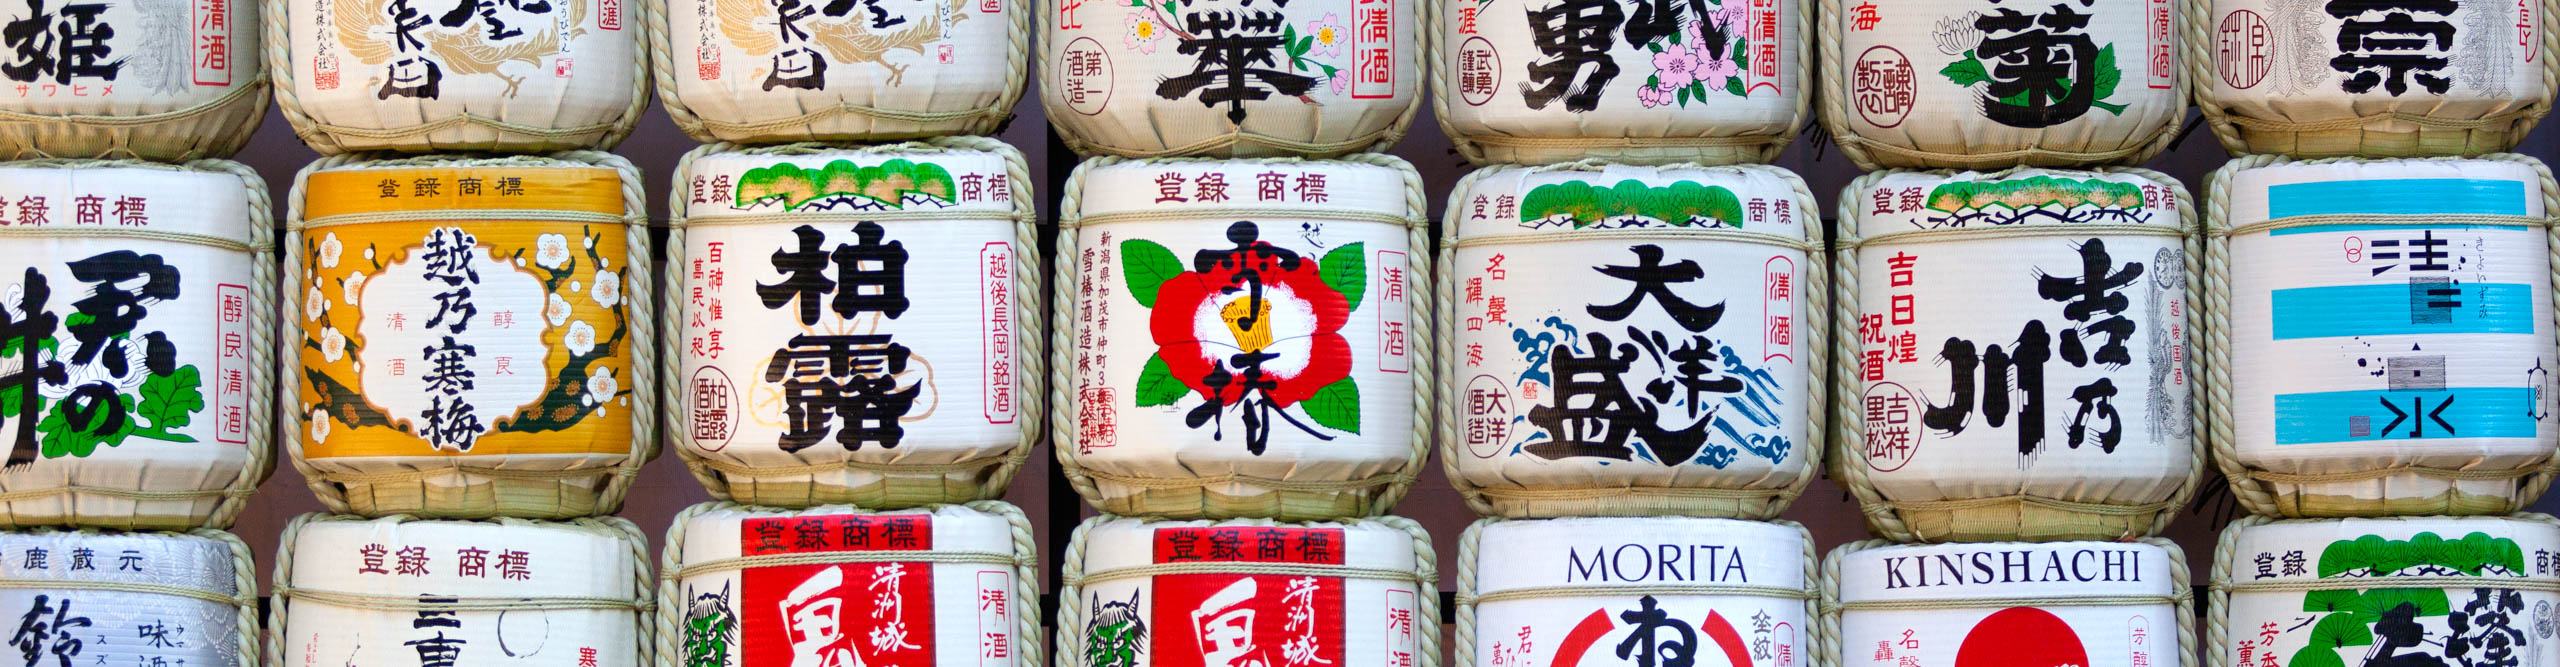 Saki barrels on display covered in Japanese writing and pictures of flowers